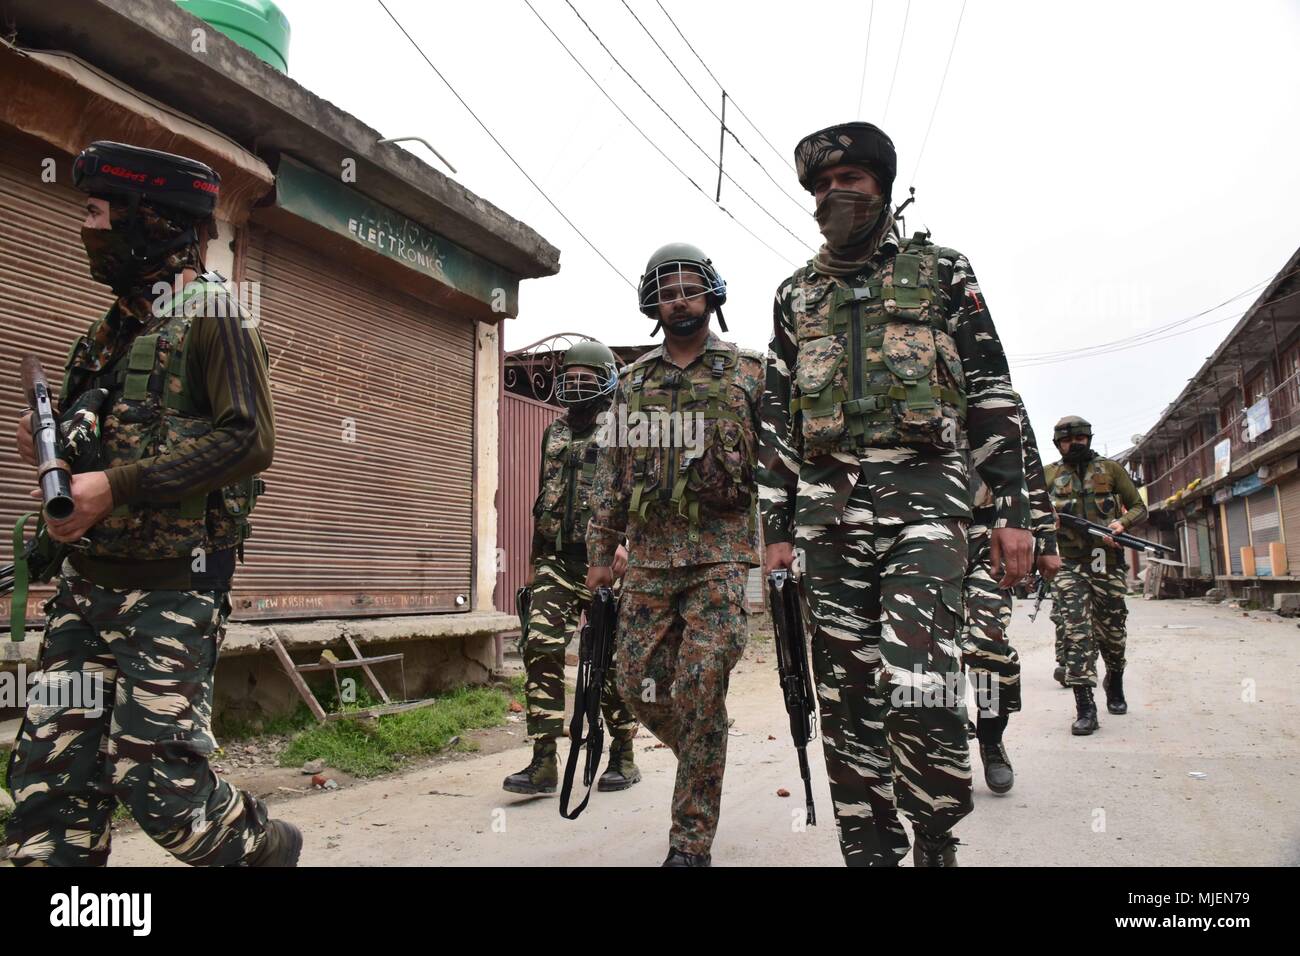 May 5, 2018 - Srinagar, Jammu & Kashmir, India - Indian army patrolling and standing guard near the Encounter site in Srinagar. 4 Killed and several injured in an encounter between Indian forces and militants at chatabal area of Srinagar summer capital of Indian Kashmir on Saturday. Three militants were killed during a brief shootout after government forces laid seige around densely populated chatabal area of Srinagar. A young man also died after he was hit by the armoured vehicle during the clashes between the residents and police force as residents tried to help the Militants in escape. (Cr Stock Photo